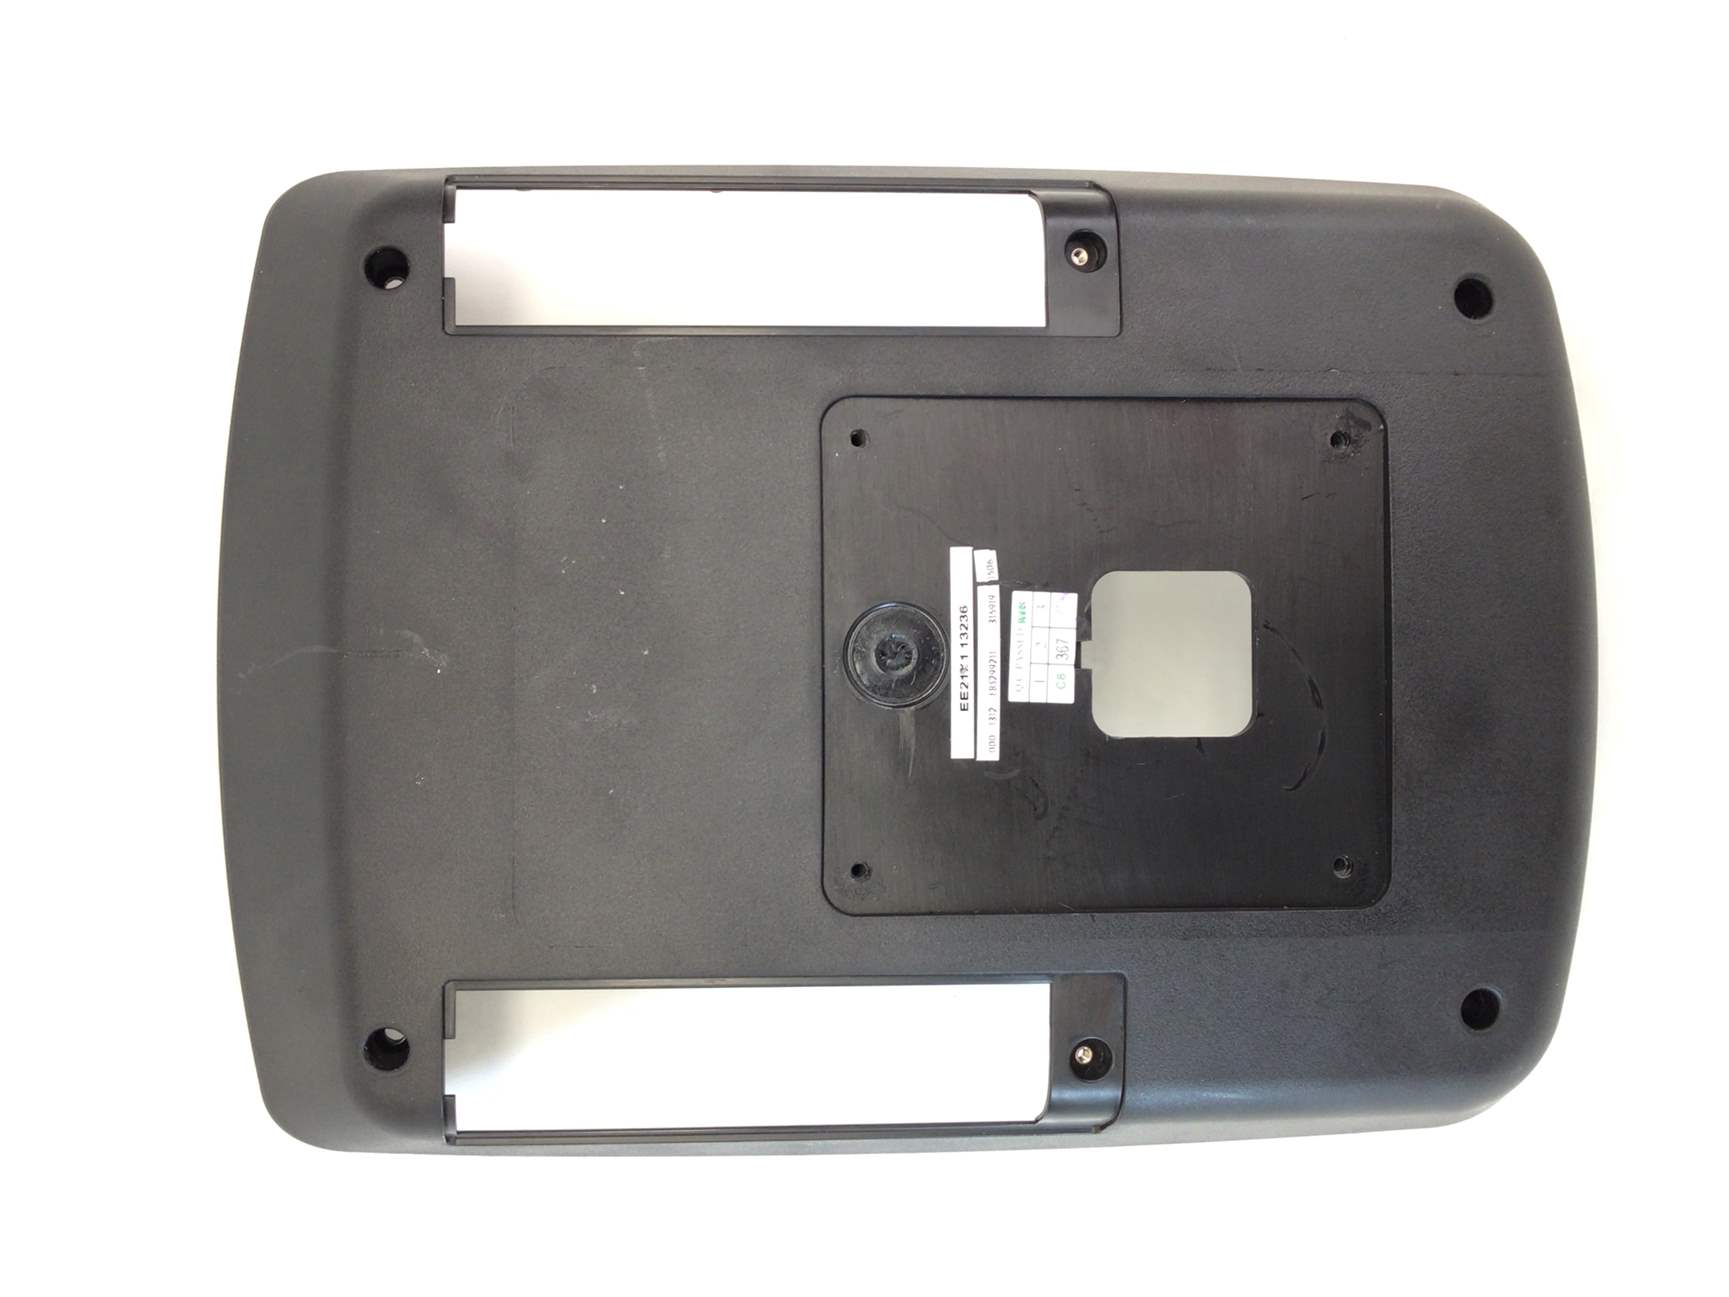 Display Console Back Cover for Console Part Number 318152 (Used)